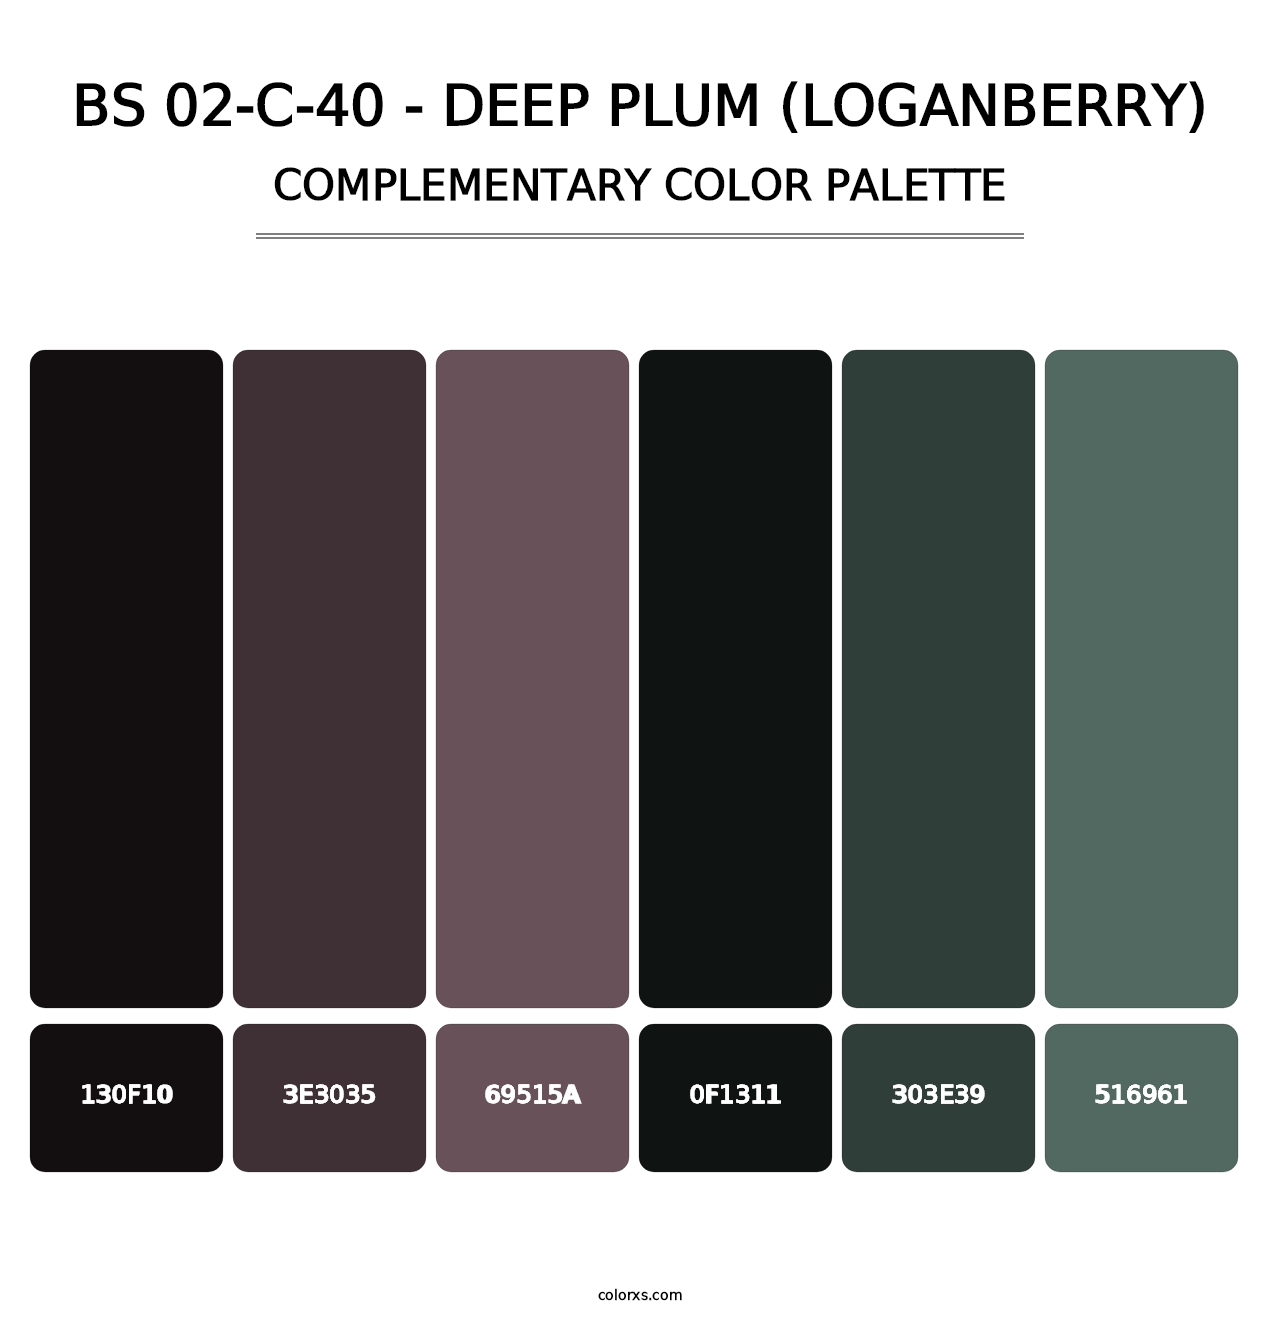 BS 02-C-40 - Deep Plum (Loganberry) - Complementary Color Palette